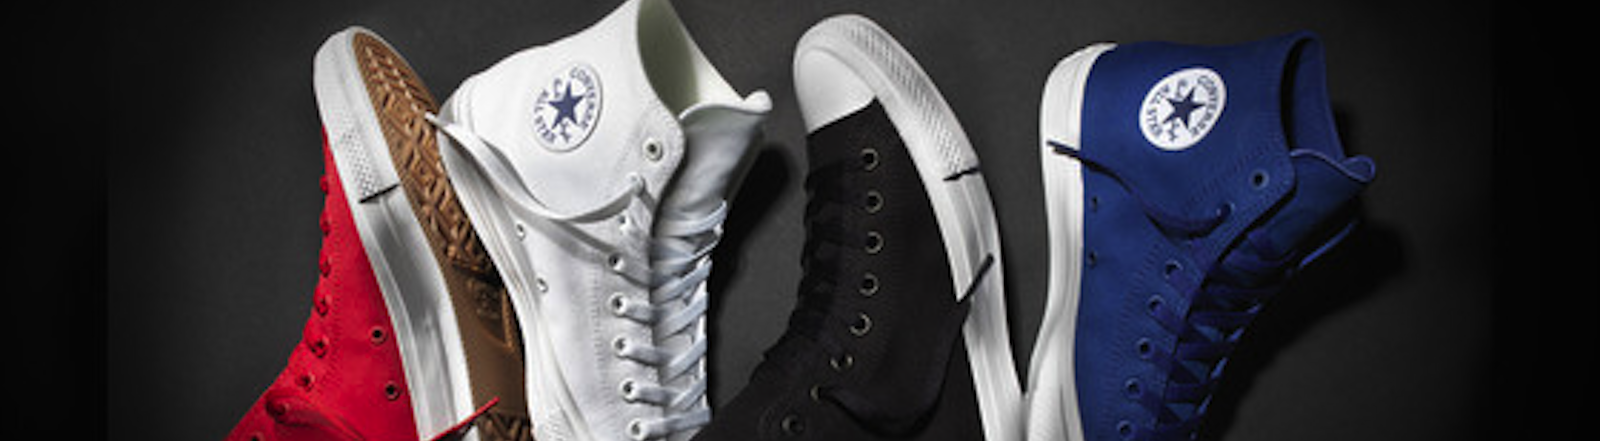 Chuck 2: Converse announces first All-Star redesign in 100 years - Digiday